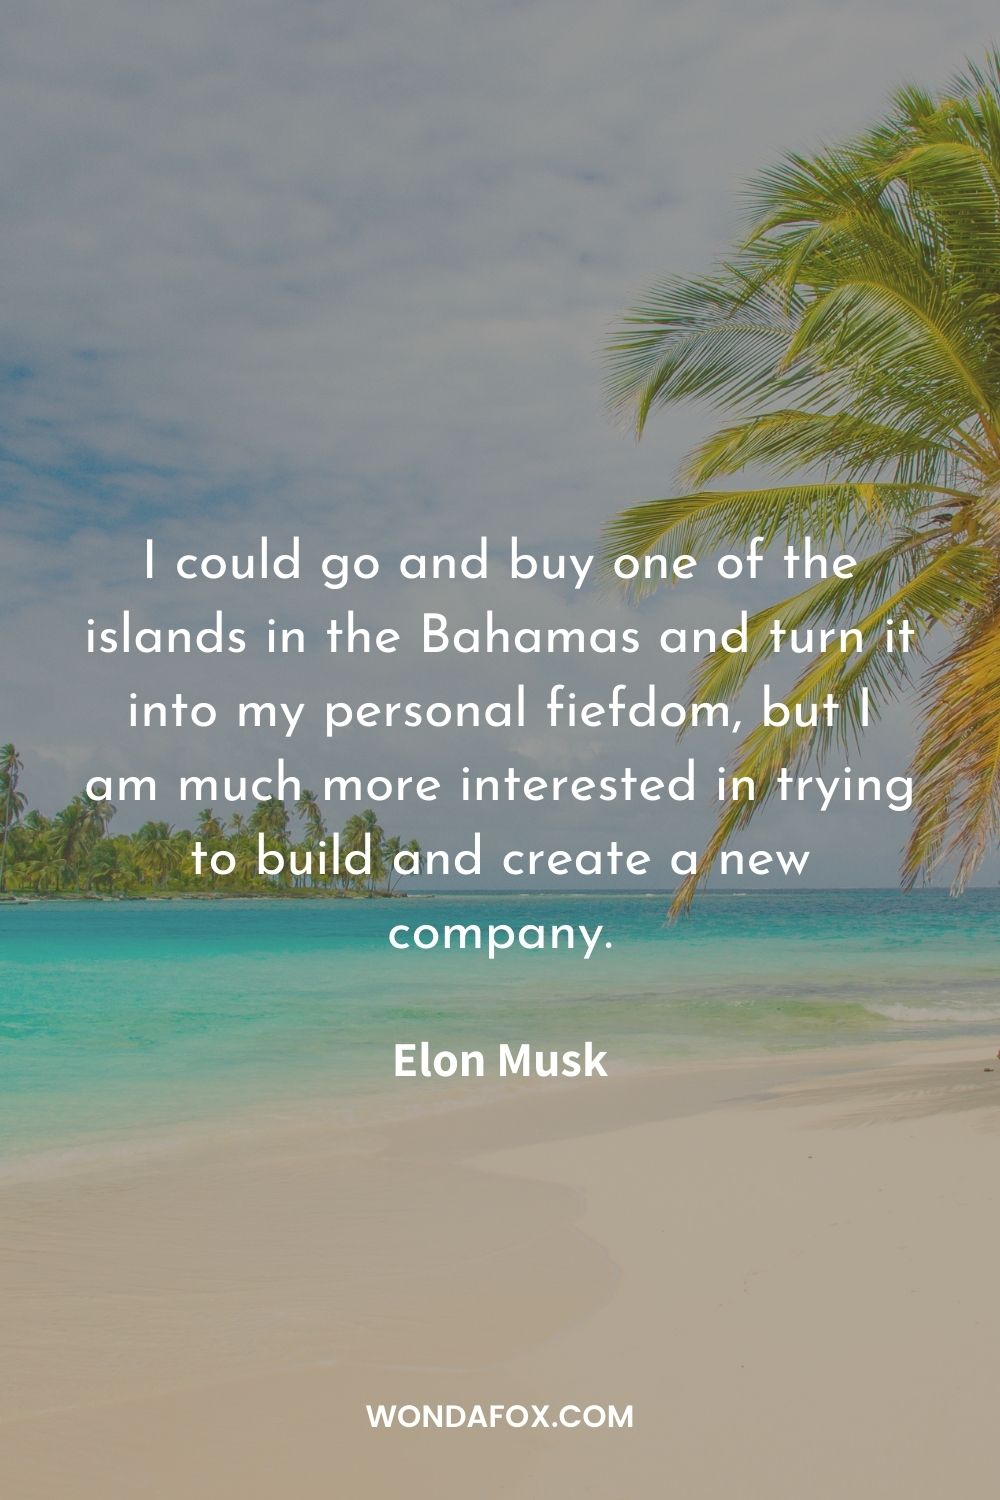 I could go and buy one of the islands in the Bahamas and turn it into my personal fiefdom, but I am much more interested in trying to build and create a new company.